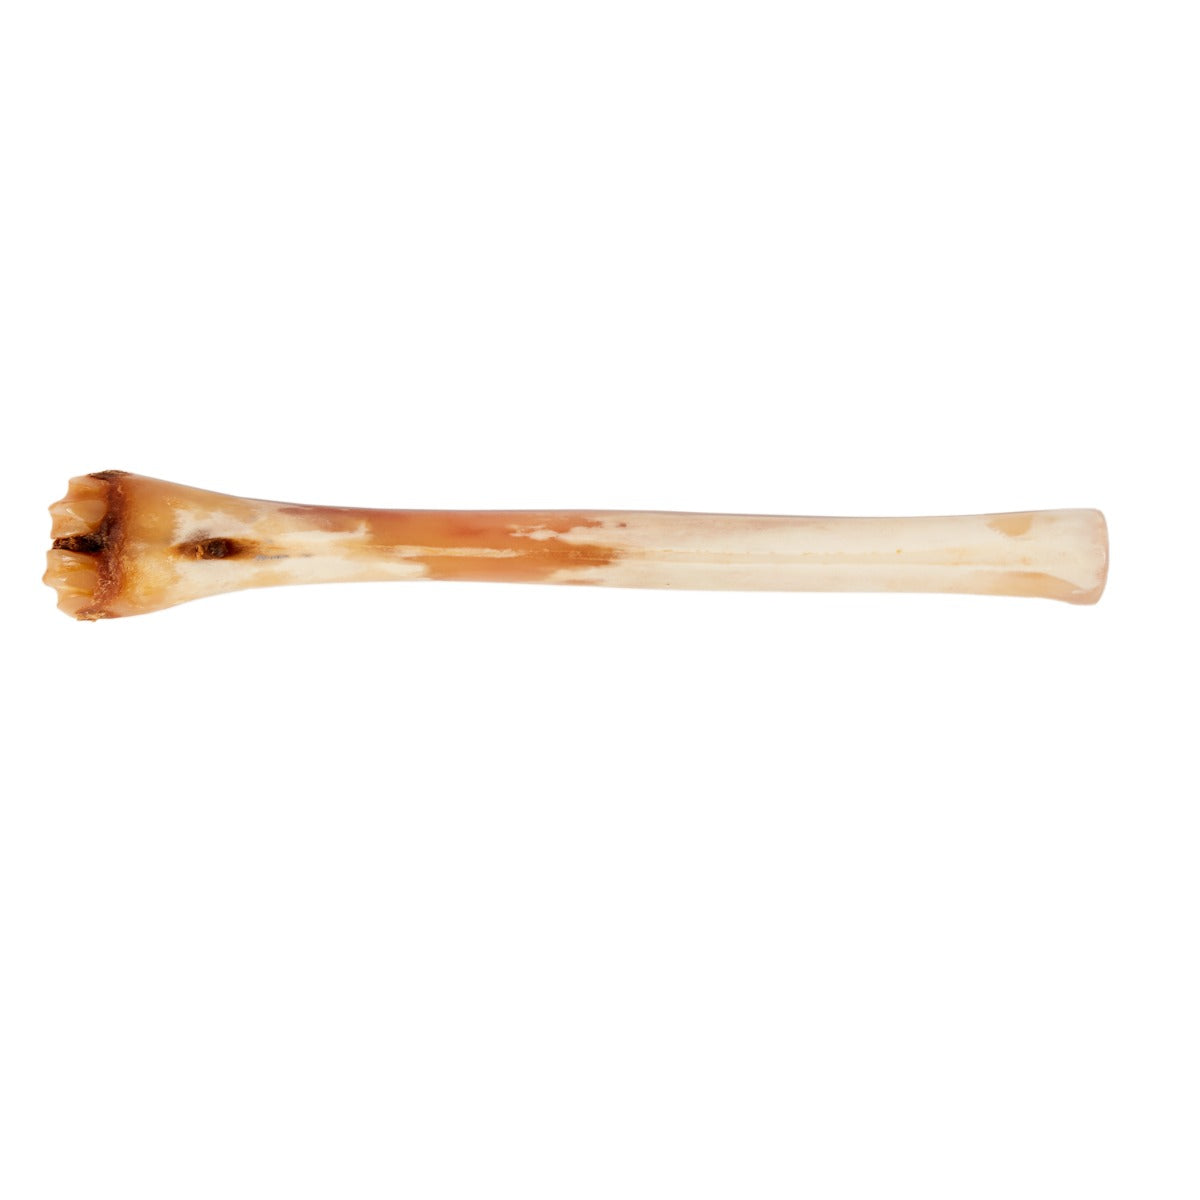 A Cordovan Deer Polishing Bone from KirbyAllison.com, suitable for polishing leather scratches on cordovan shoes.